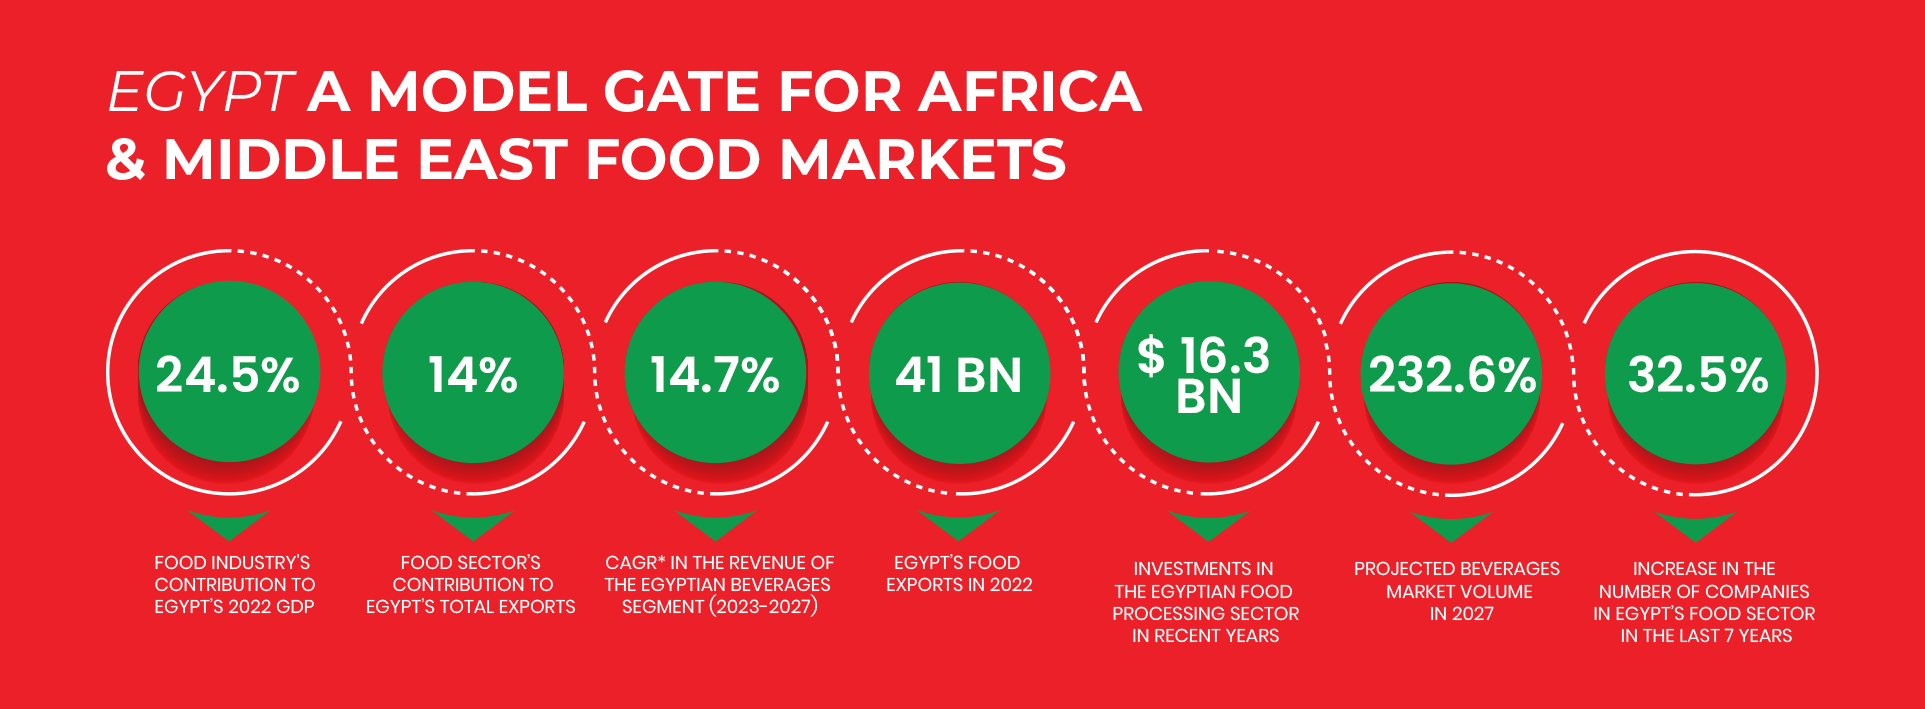 EGYPT: A MODEL GATE FOR AFRICA & MIDDLE EAST FOOD MARKETS